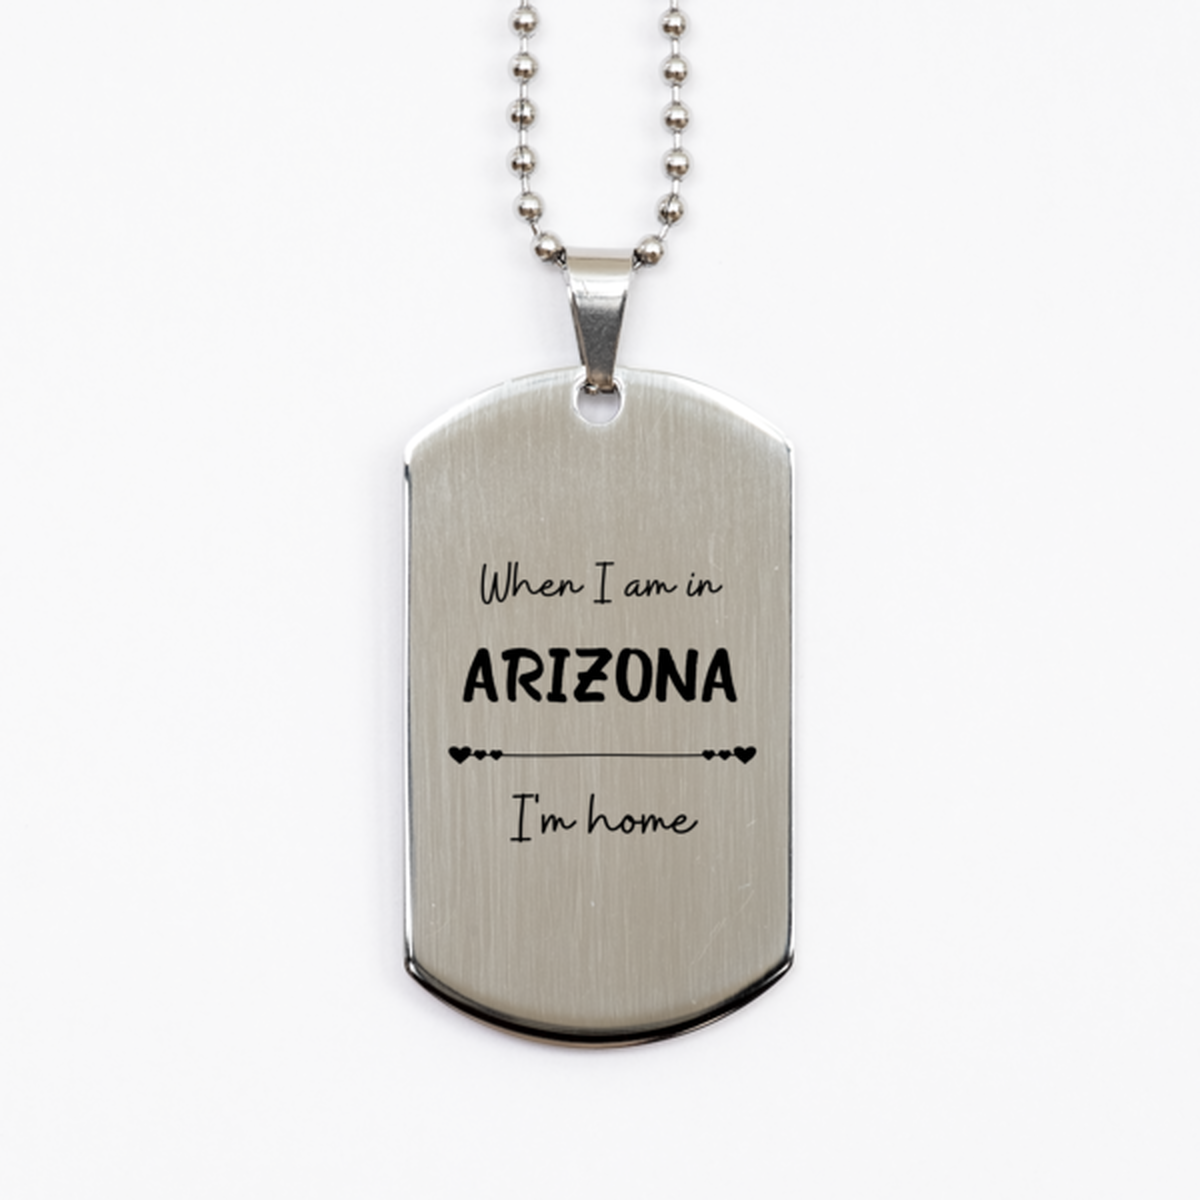 When I am in Arizona I'm home Silver Dog Tag, Cheap Gifts For Arizona, State Arizona Birthday Gifts for Friends Coworker